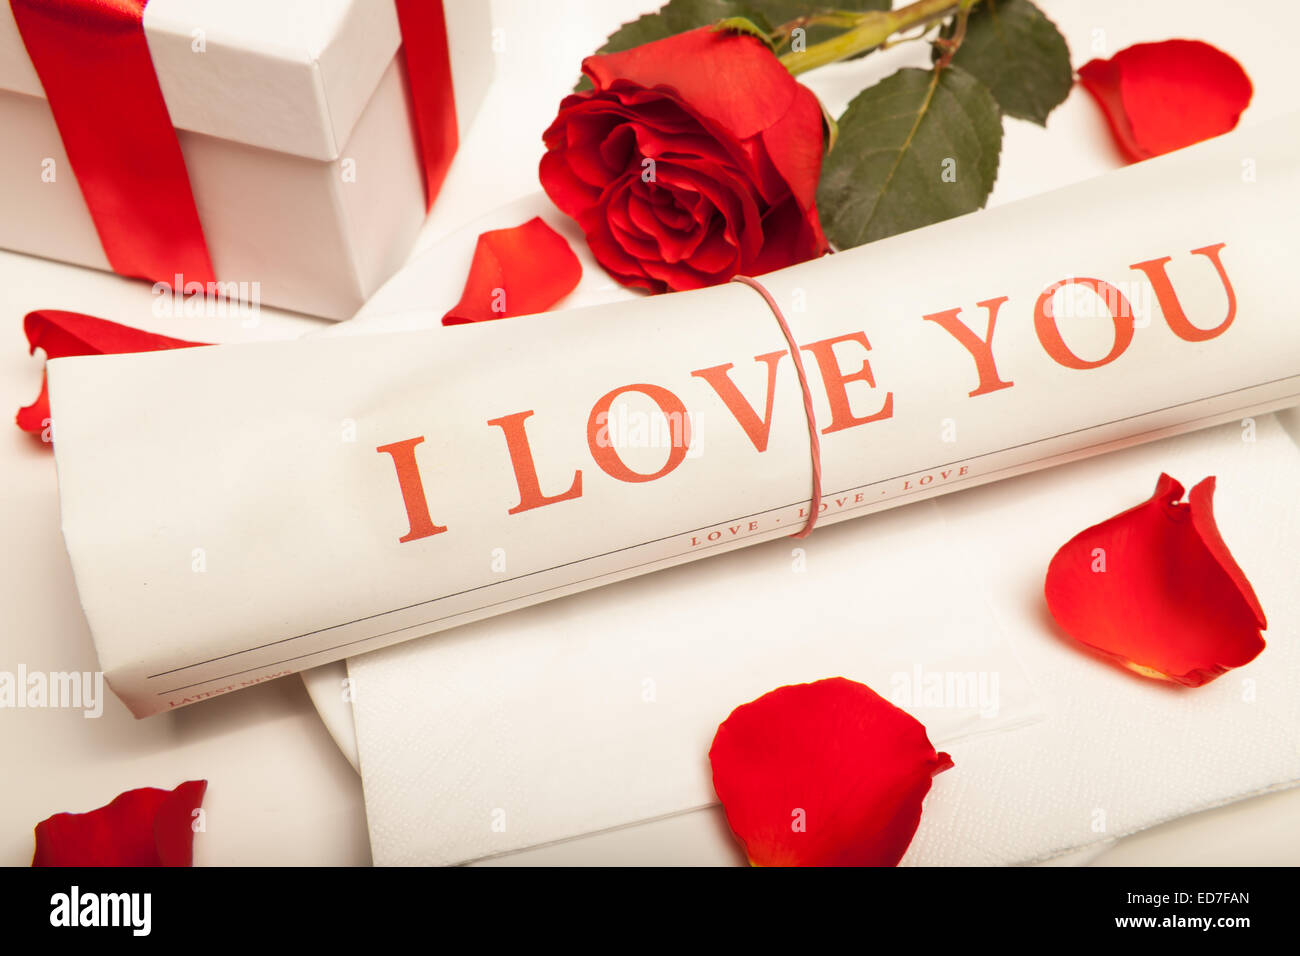 I Love You Newspaper Red Rose And Present Box Stock Photo